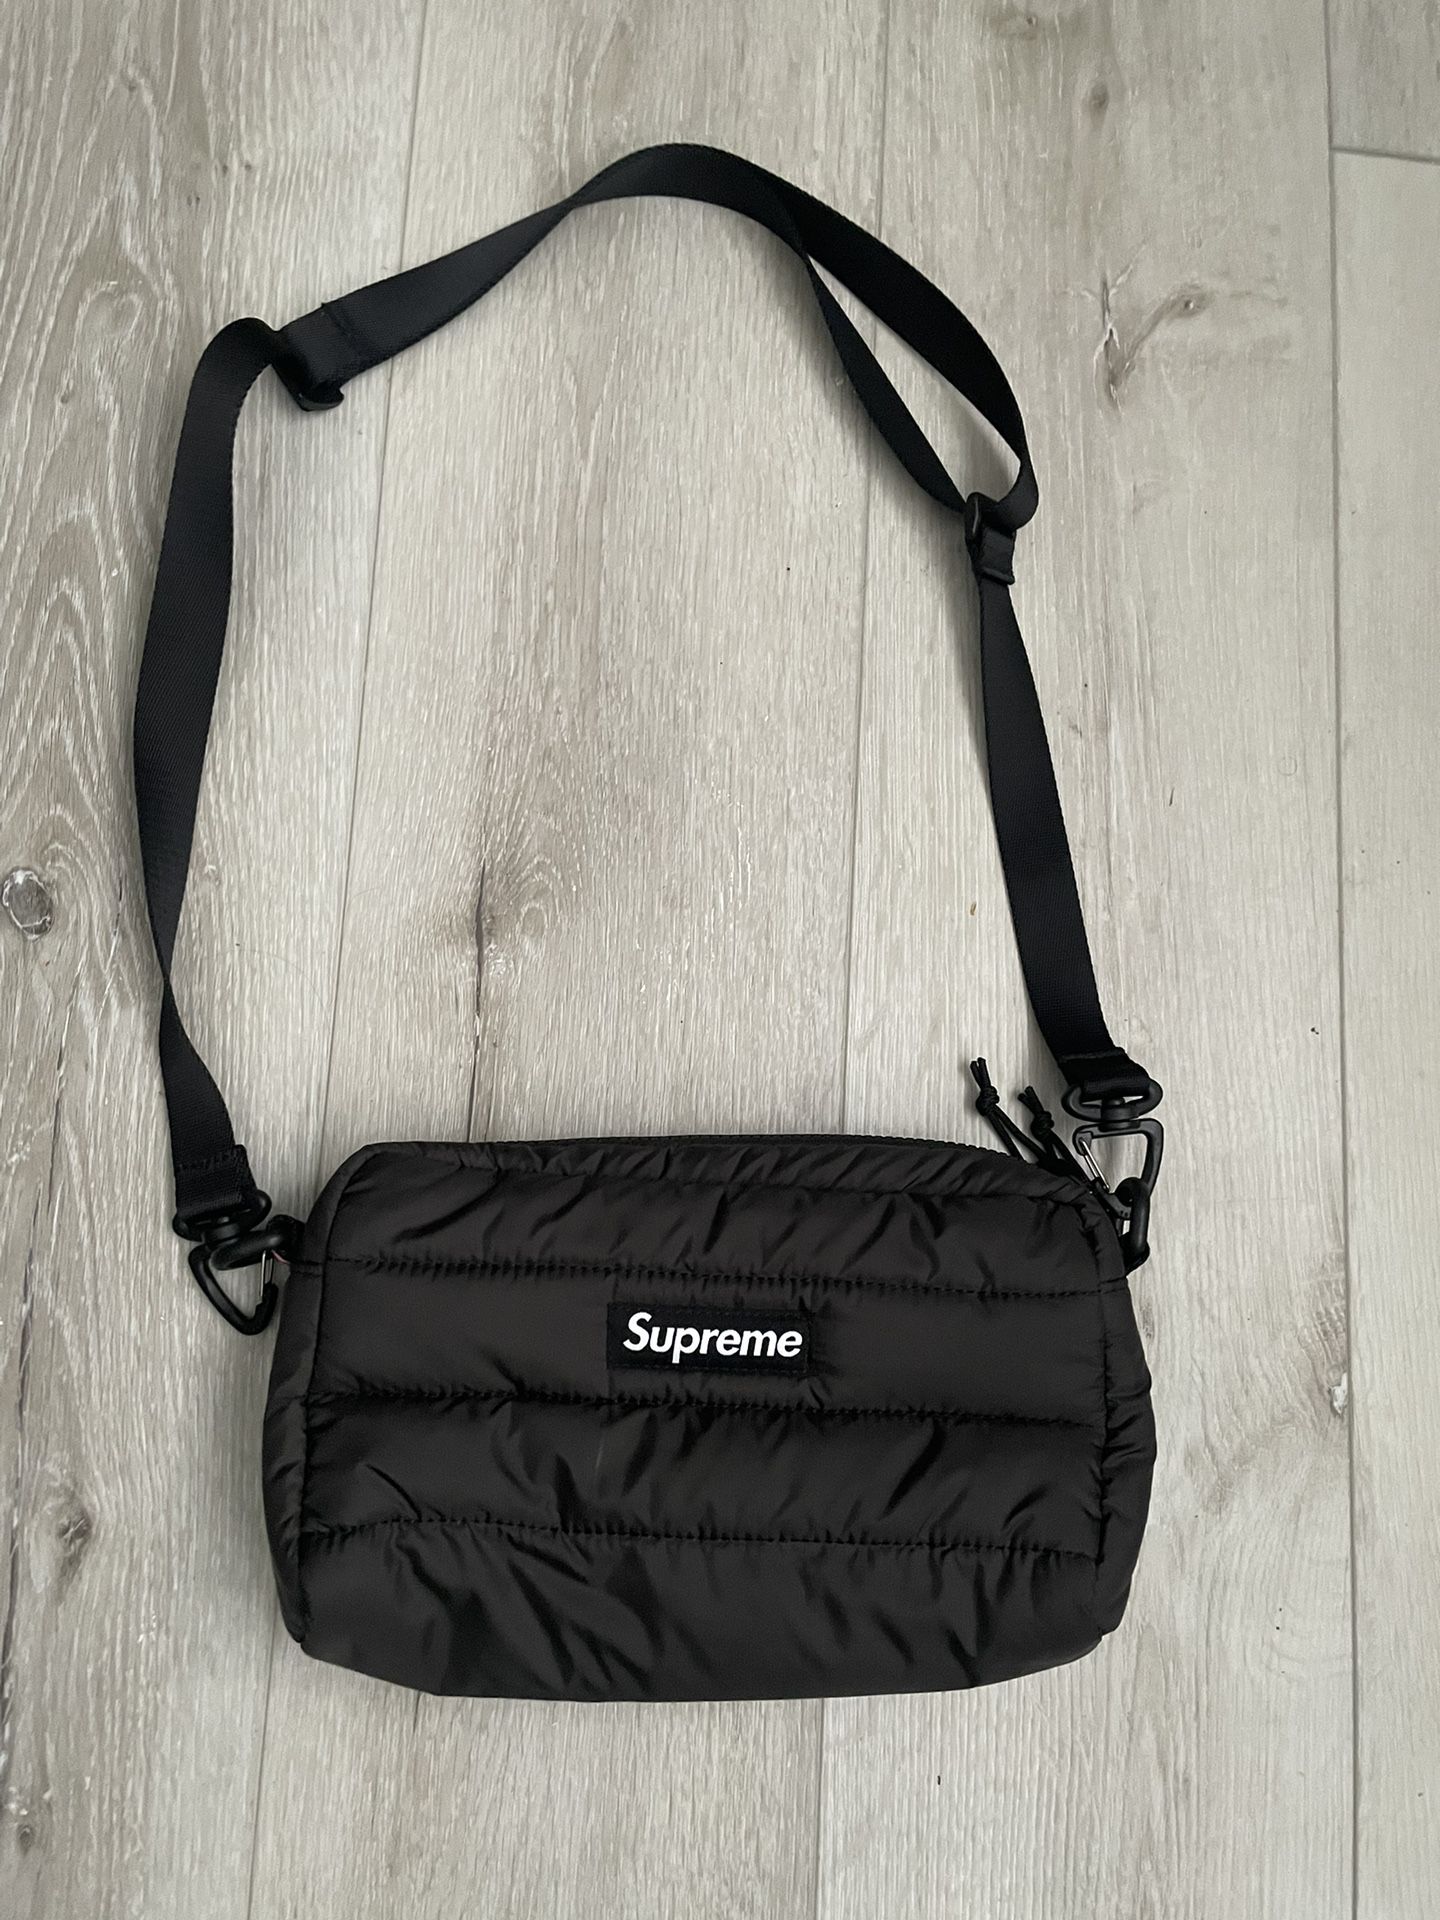 Supreme Puffer Side Bag for Sale in Lake View Terrace, CA - OfferUp